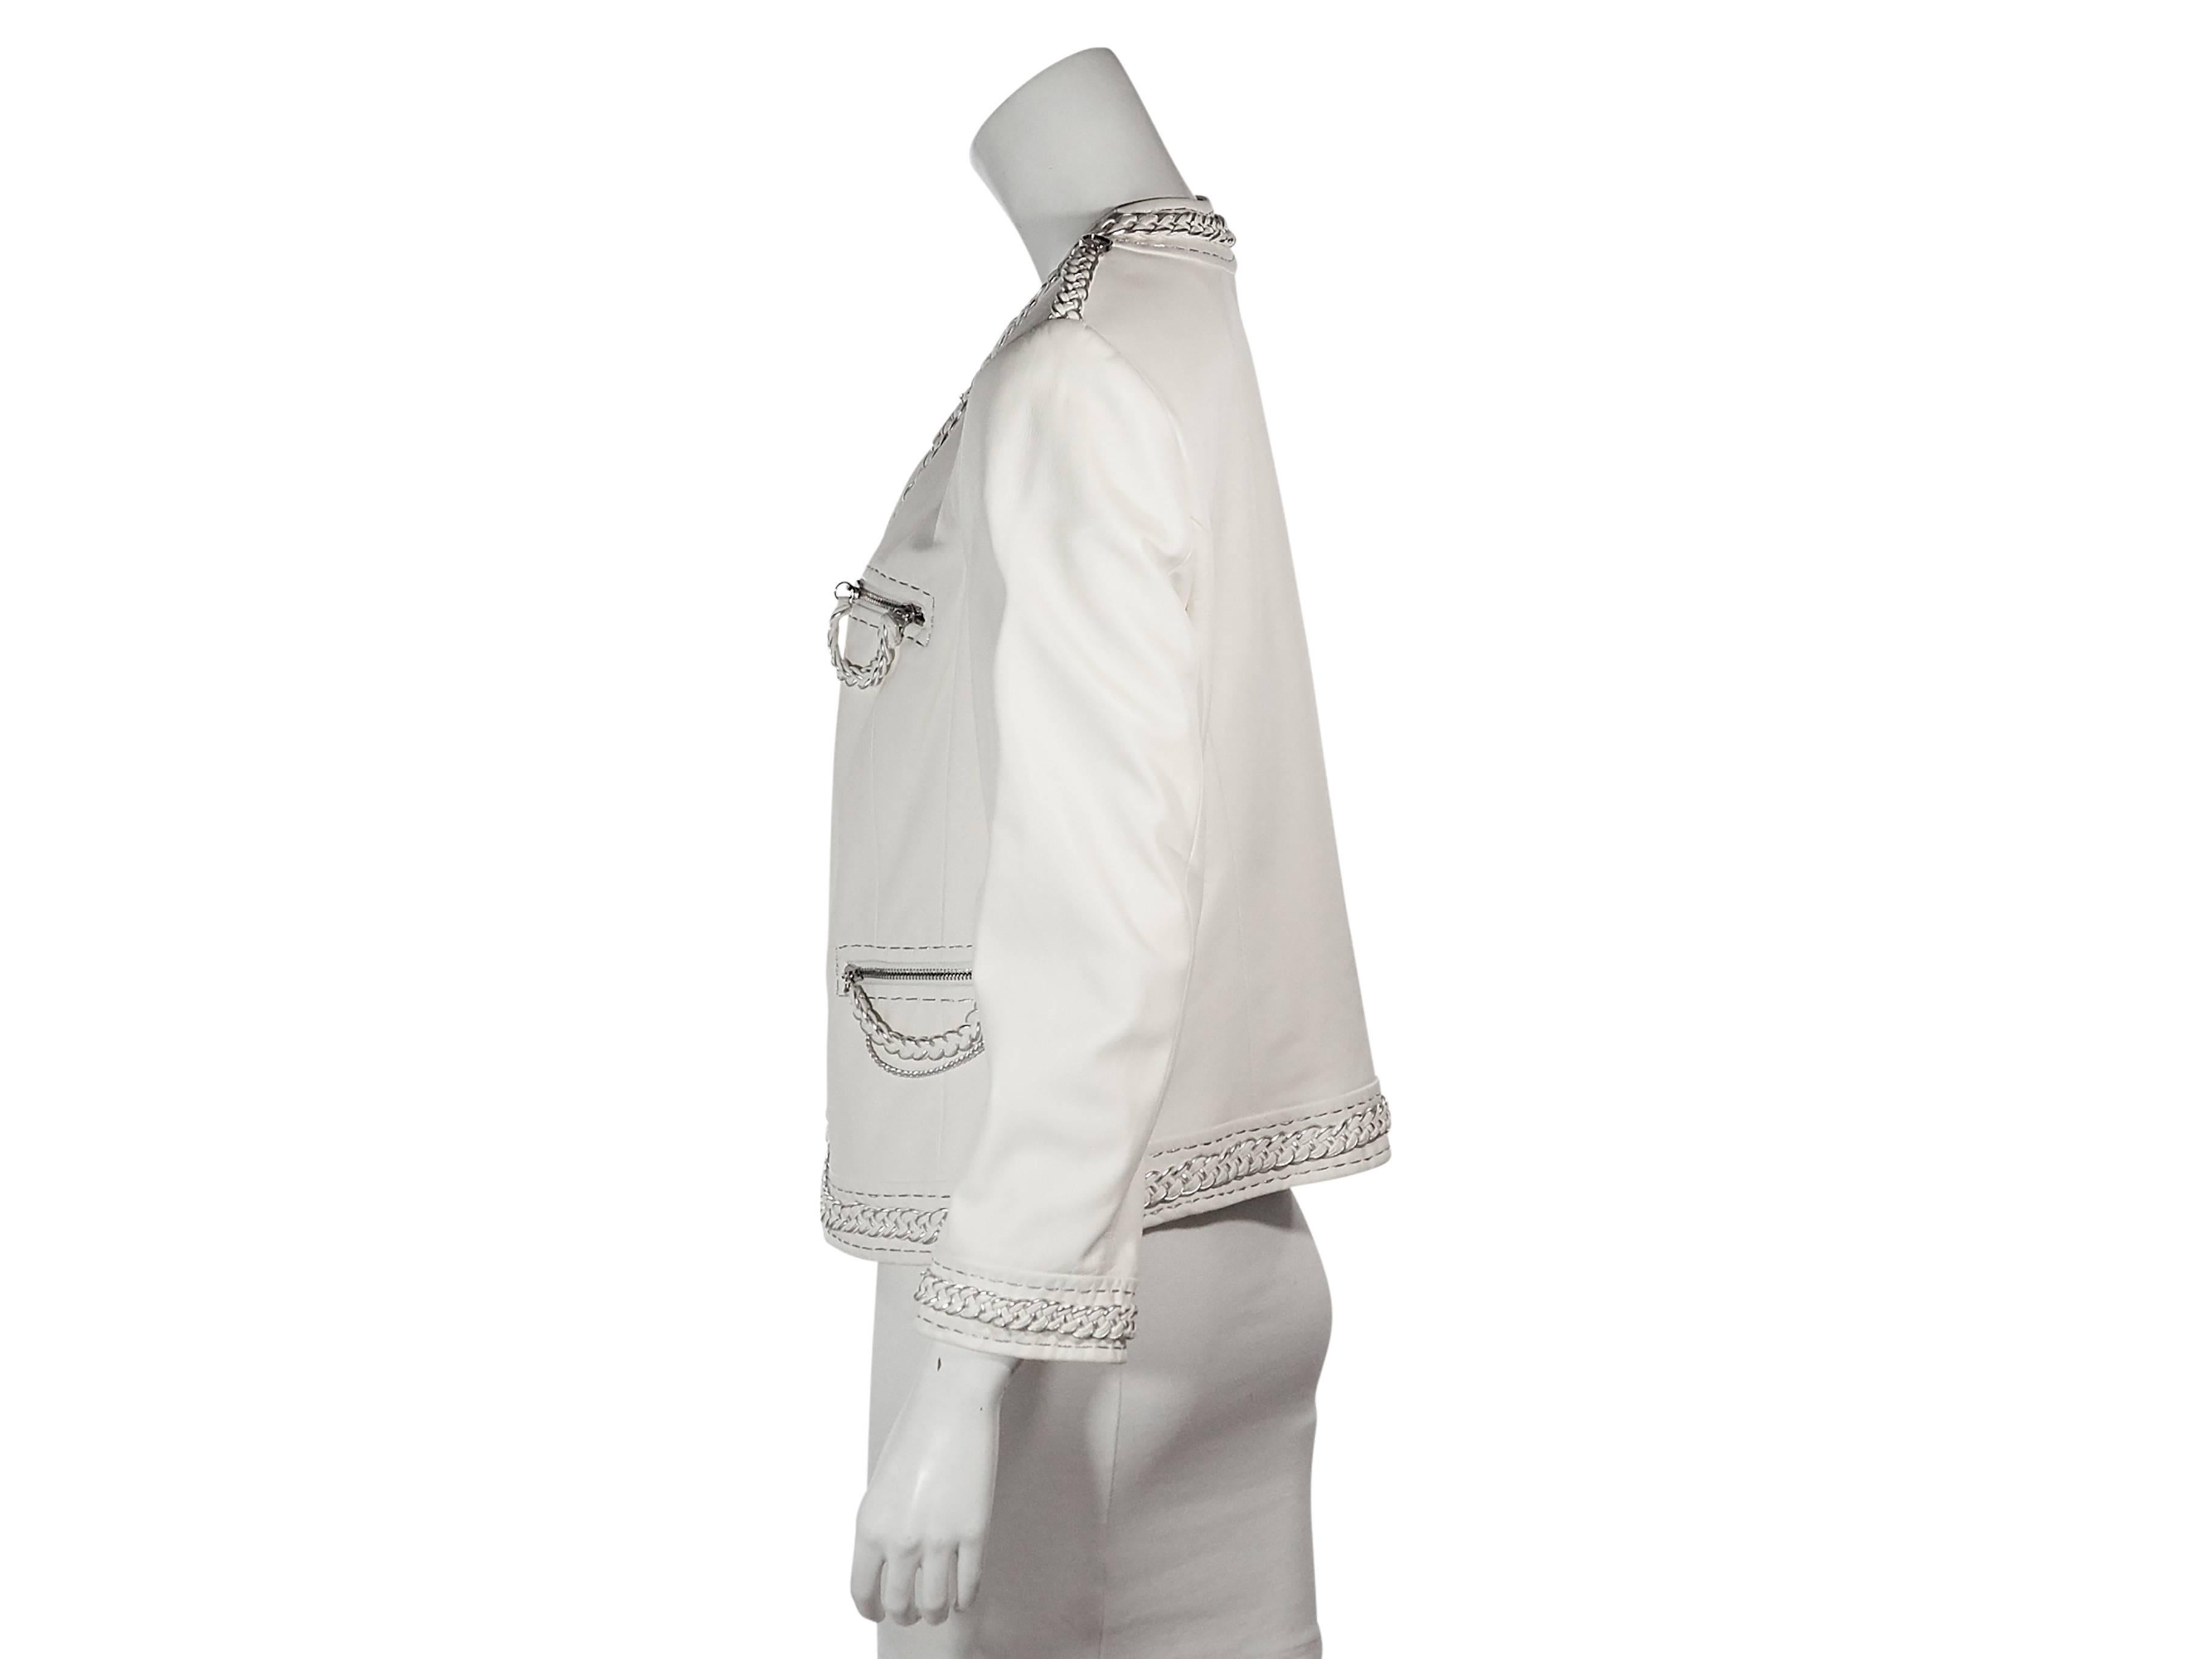 Product details: White leather jacket by Escada. Accented with braided metallic trim. Crewneck. Long sleeves. Shoulder epaulettes. Concealed zip-front closure. Four front zip pockets. Label size IT 42. 
Condition: Very good. 
Est. Retail $ 5,000.00